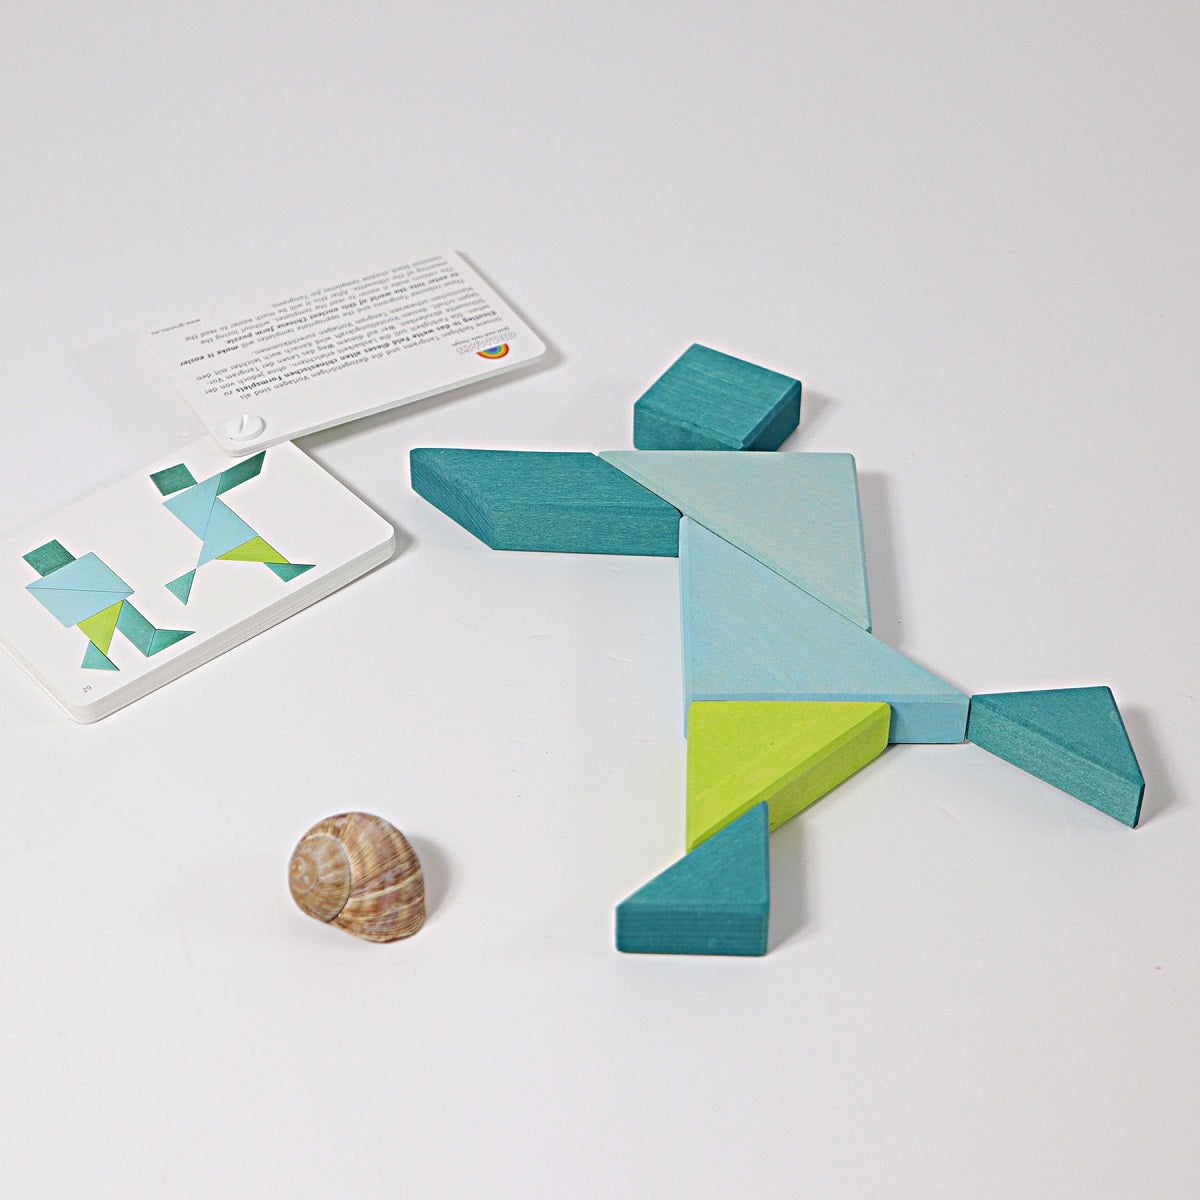 Grimm's Learning - Tangram, Blue-Green incl. Templates